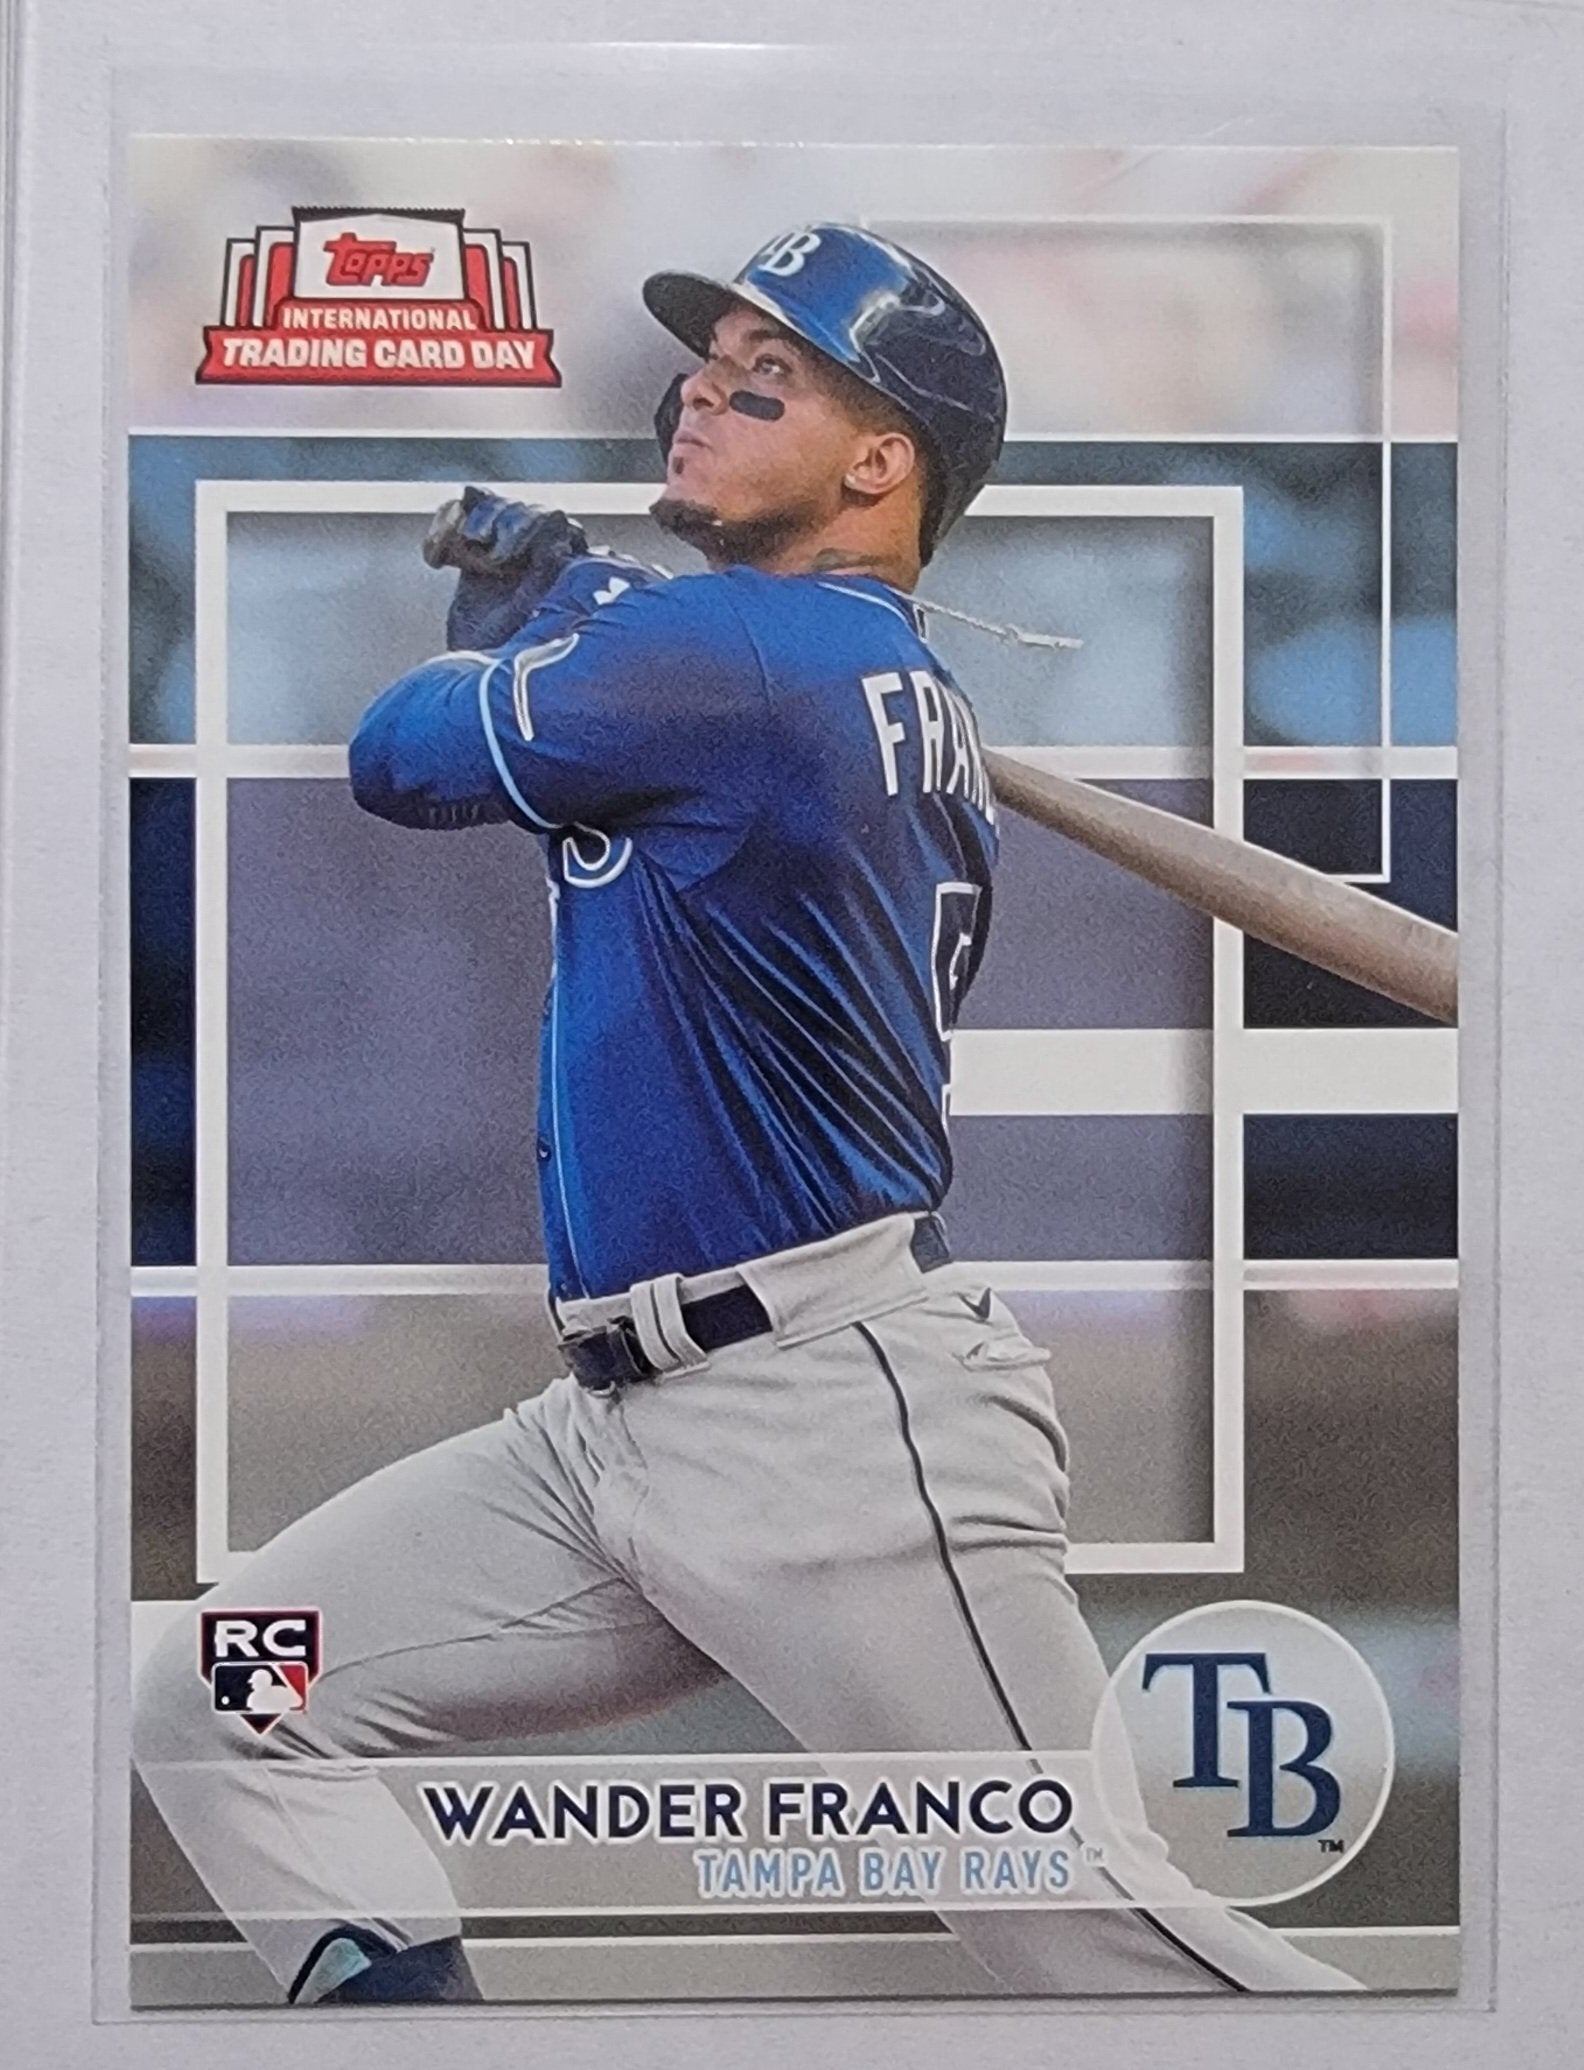 2022 Topps International Trading Card Day Wander Franco Rookie Baseball Card AVM1 simple Xclusive Collectibles   